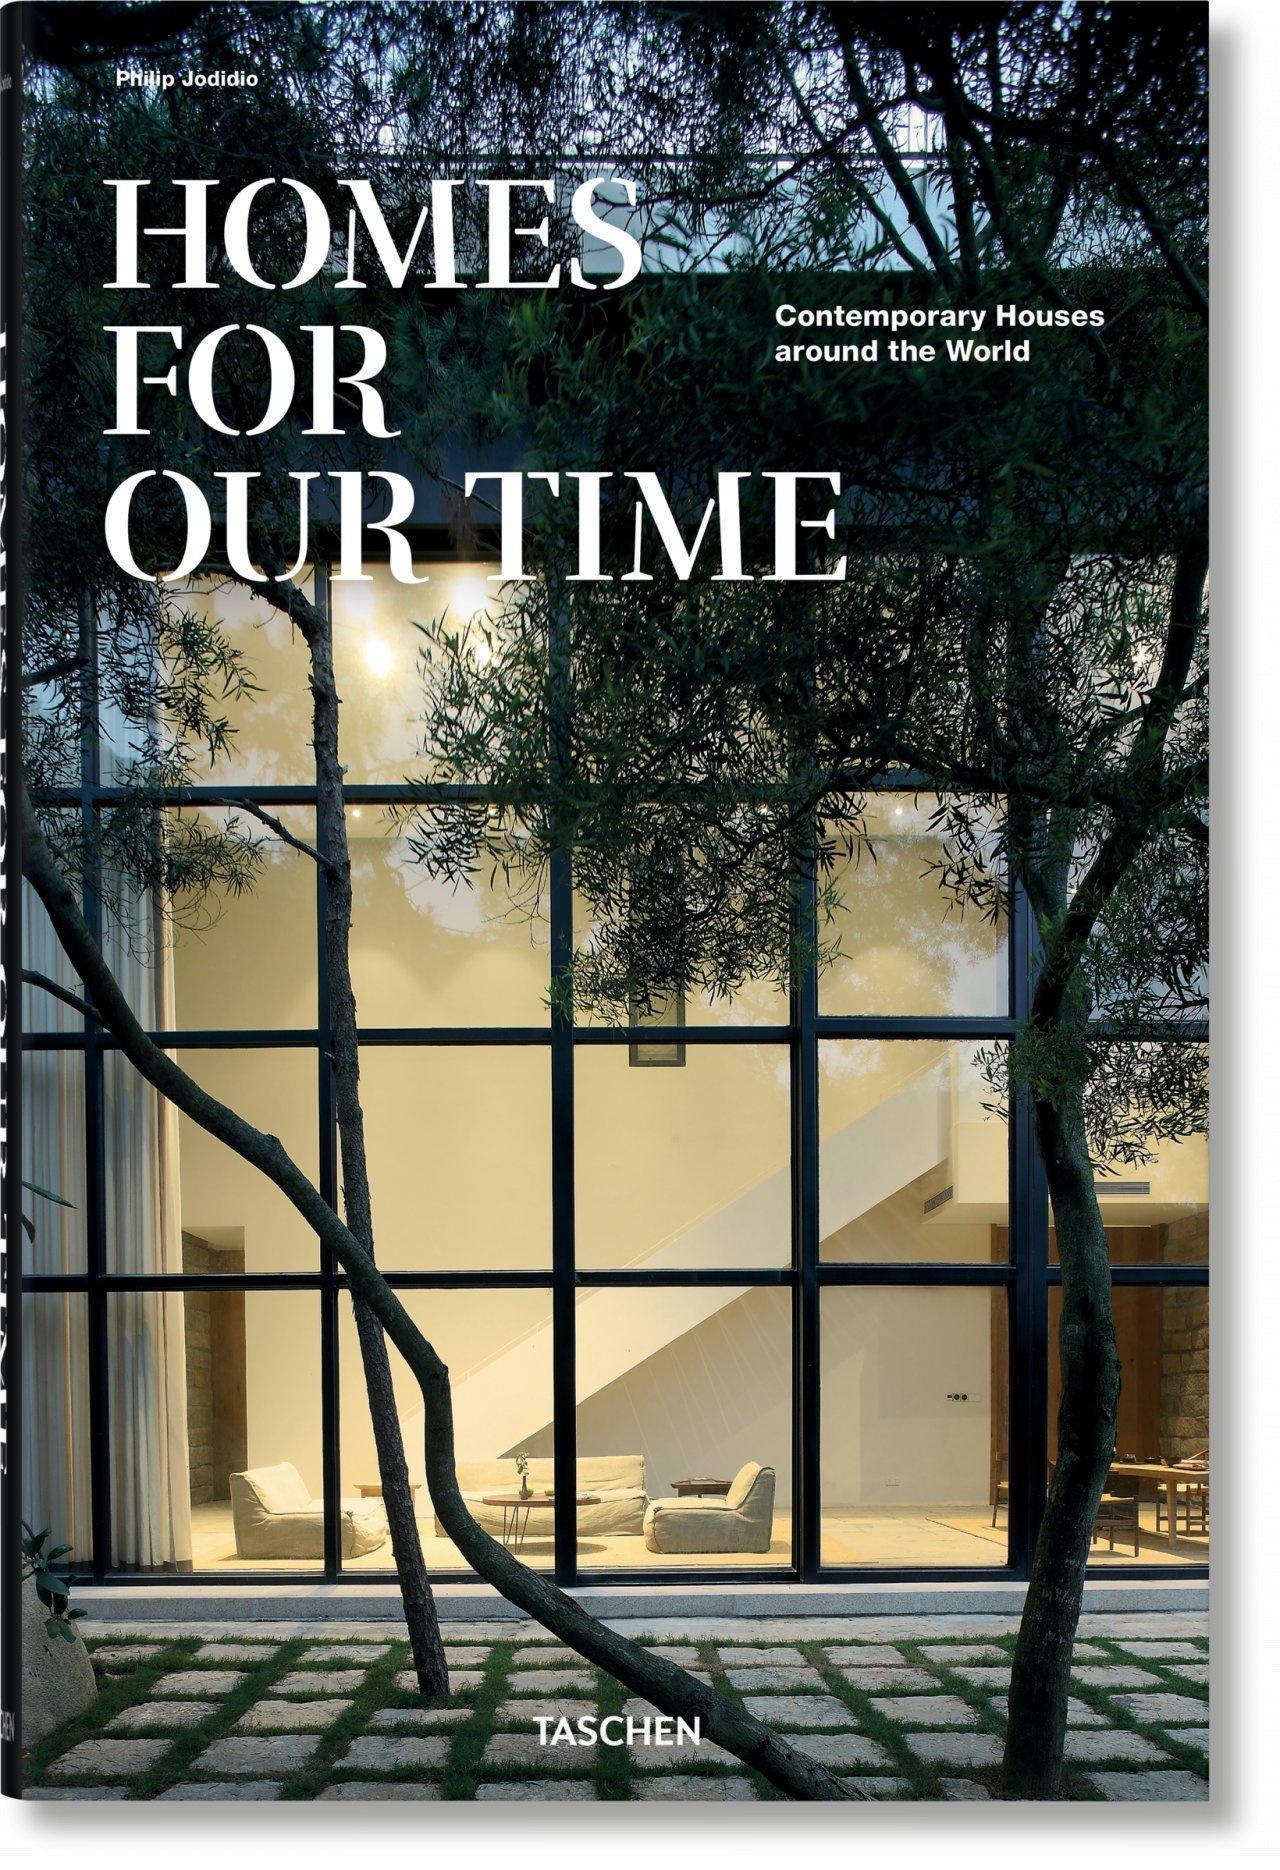 Homes for Our Time. Contemporary Houses around the World: Mehrsprachige Ausgabe